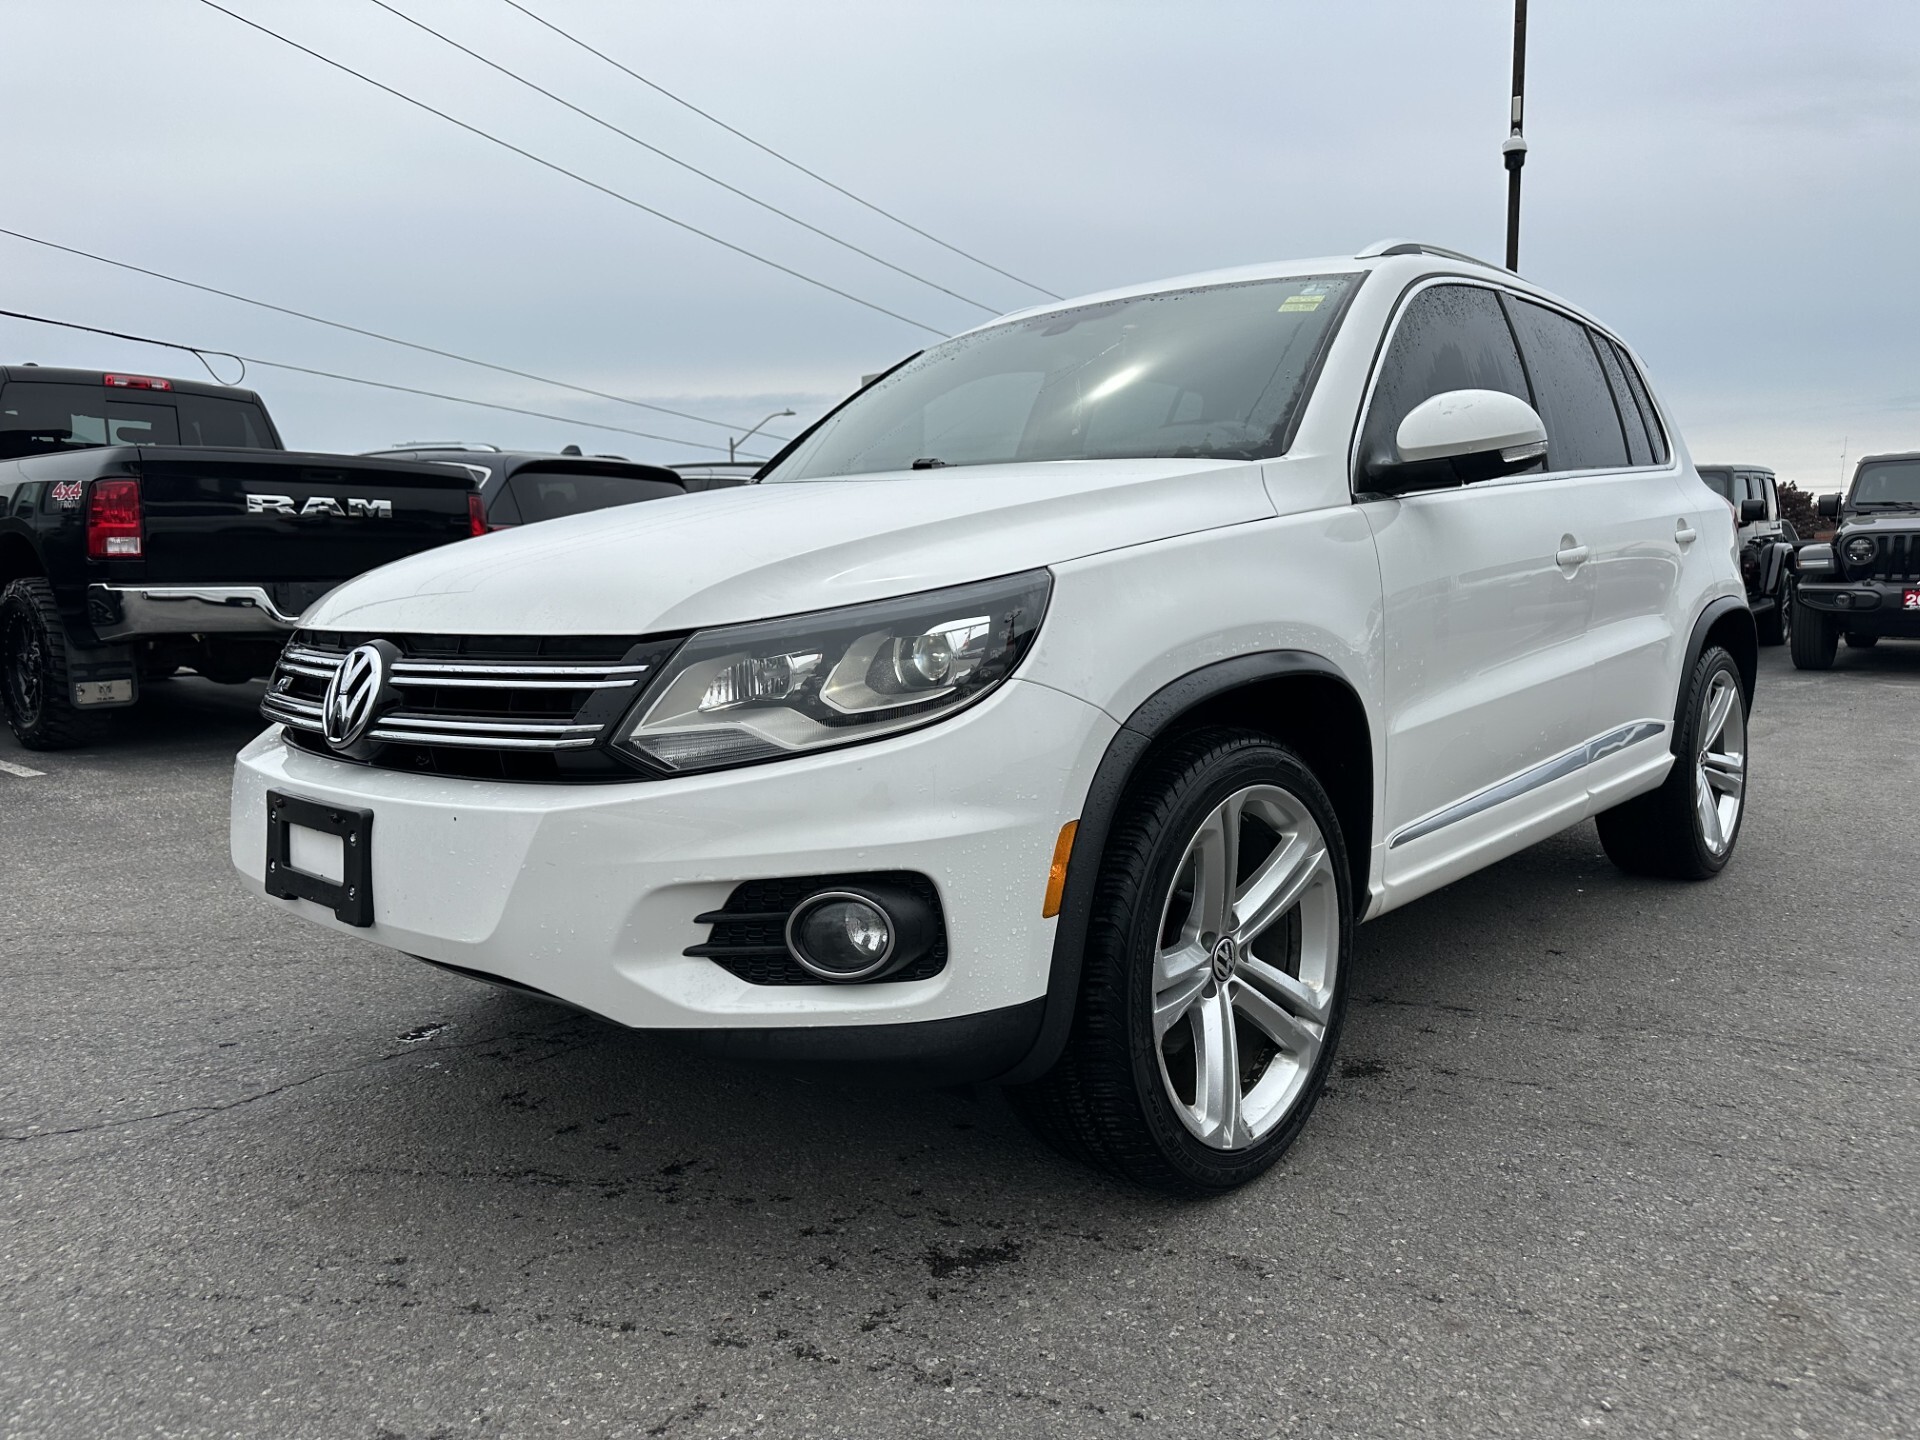 2014 Volkswagen Tiguan Highline |  WHOLESALE TO THE PUBLIC | SOLD AS IS !